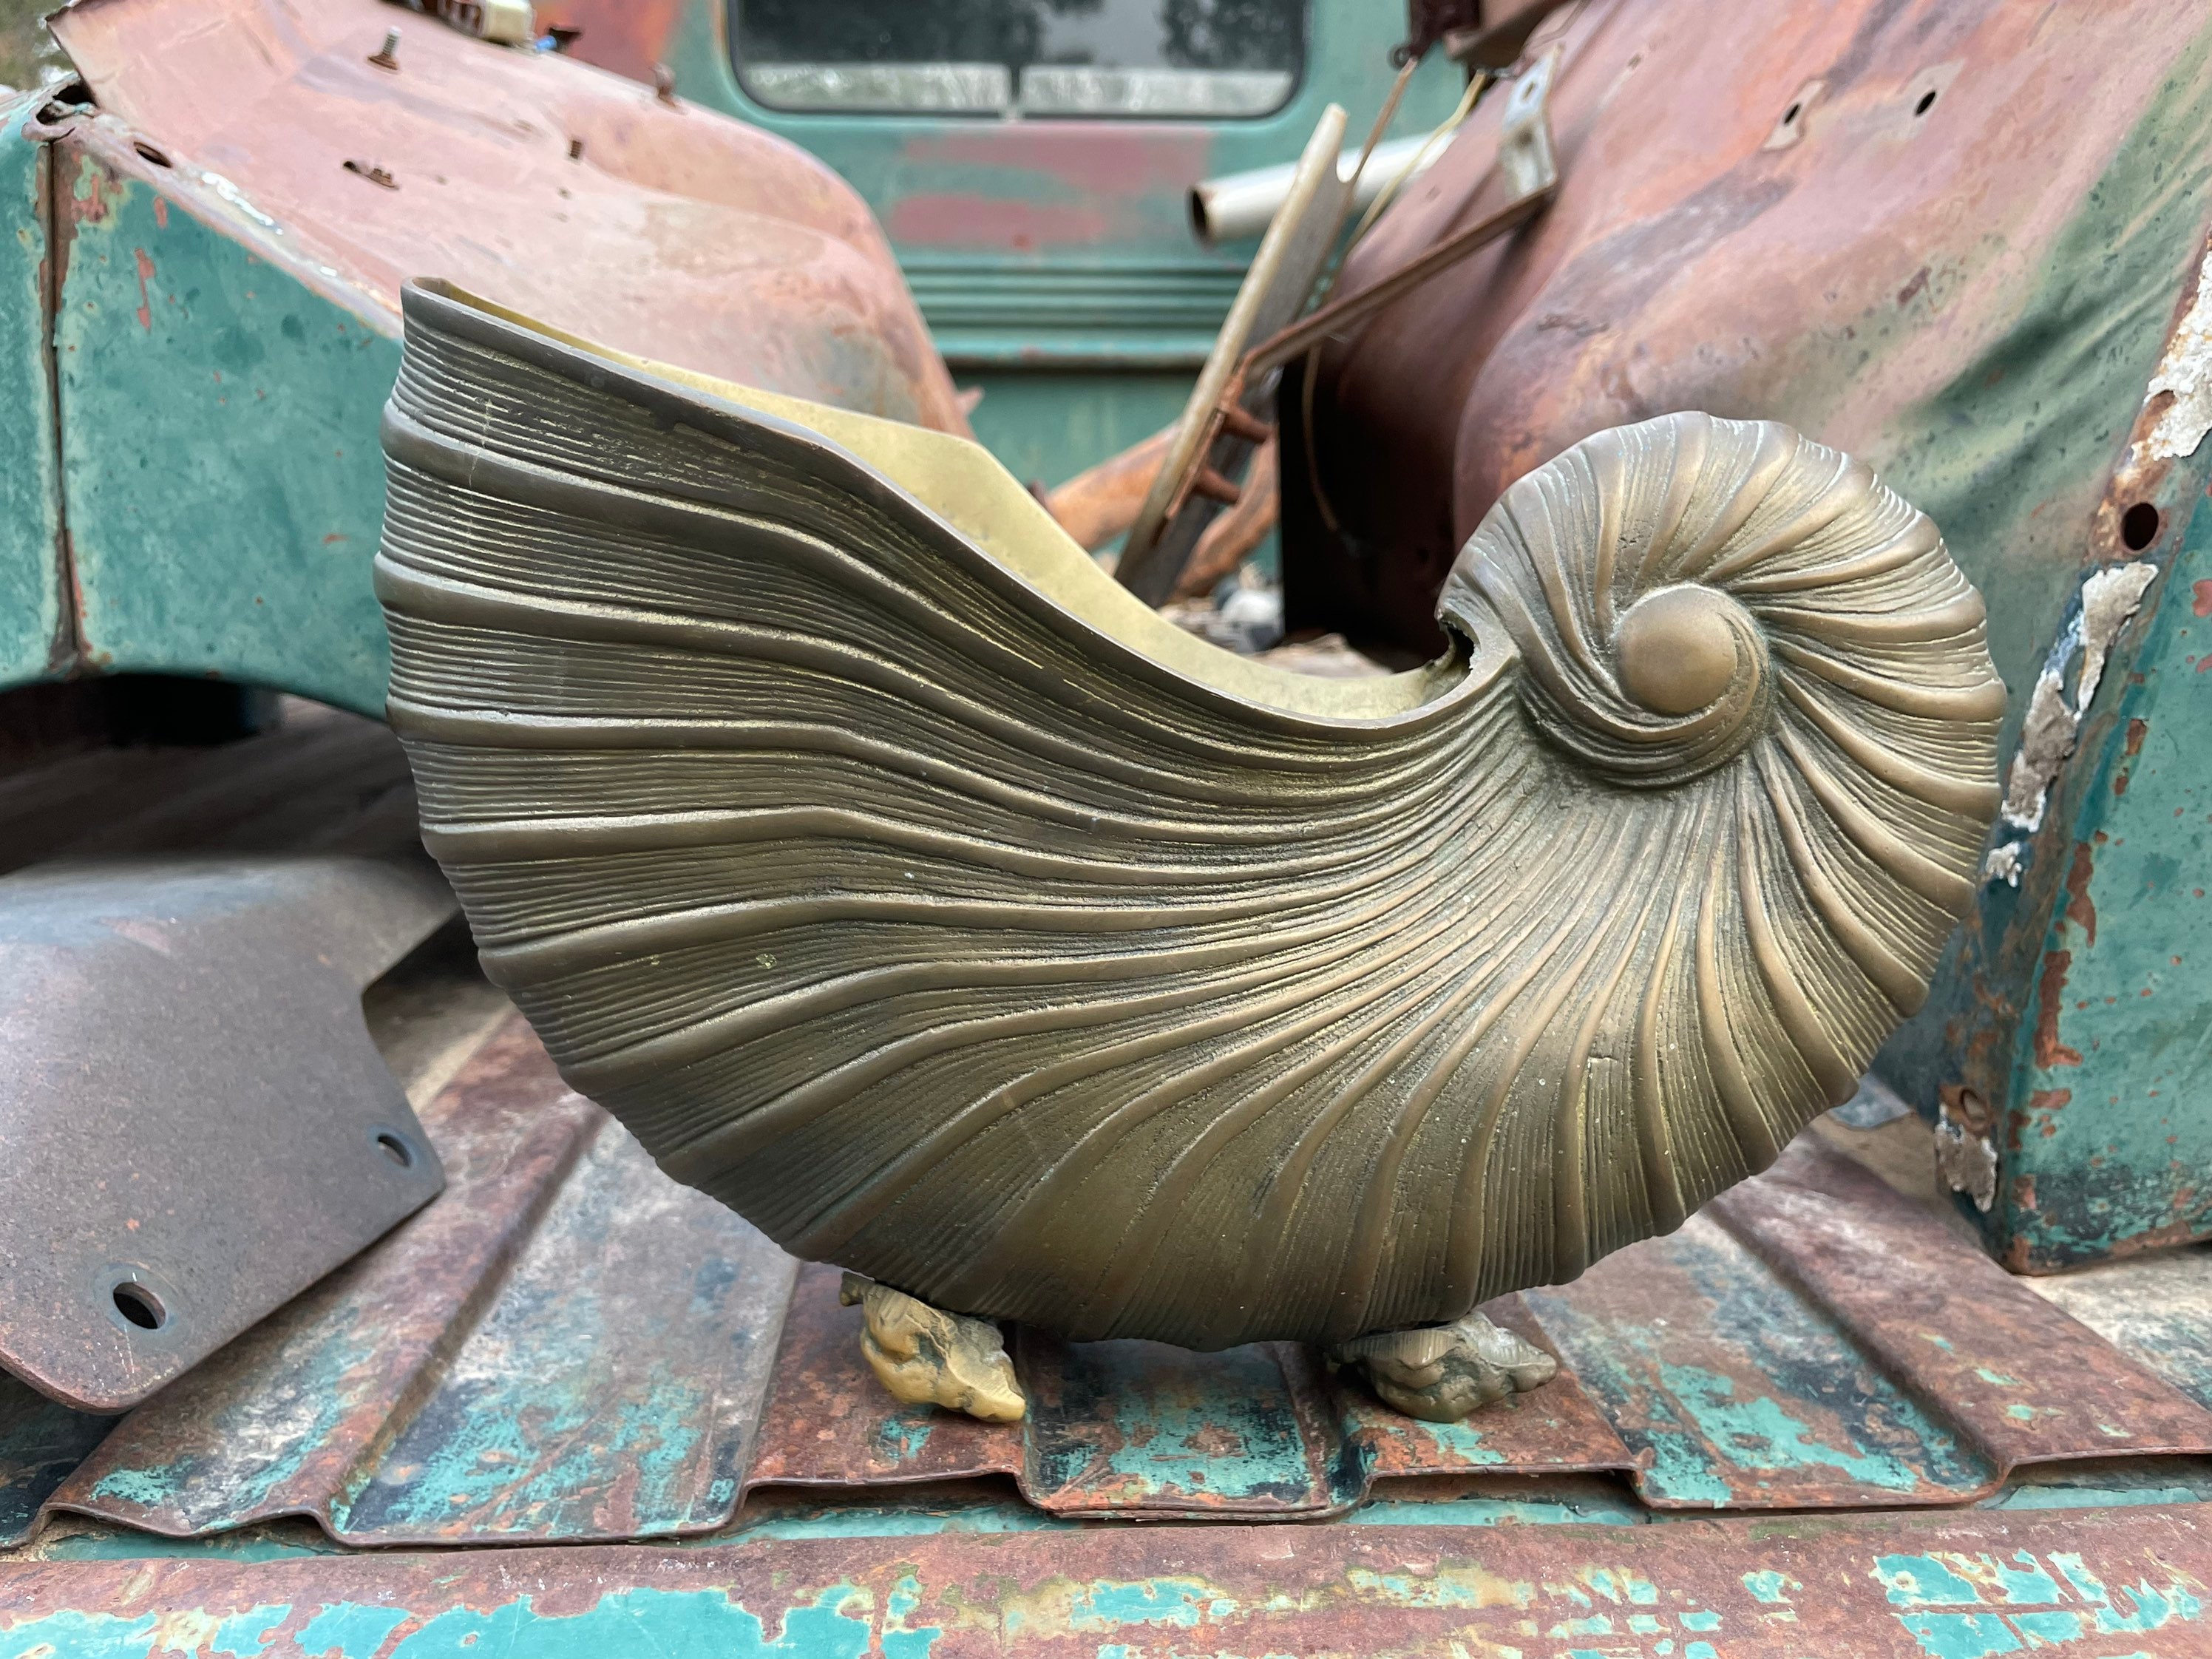 Brass Nautilus Shell Planter Cachepot with Shell Feet Details at